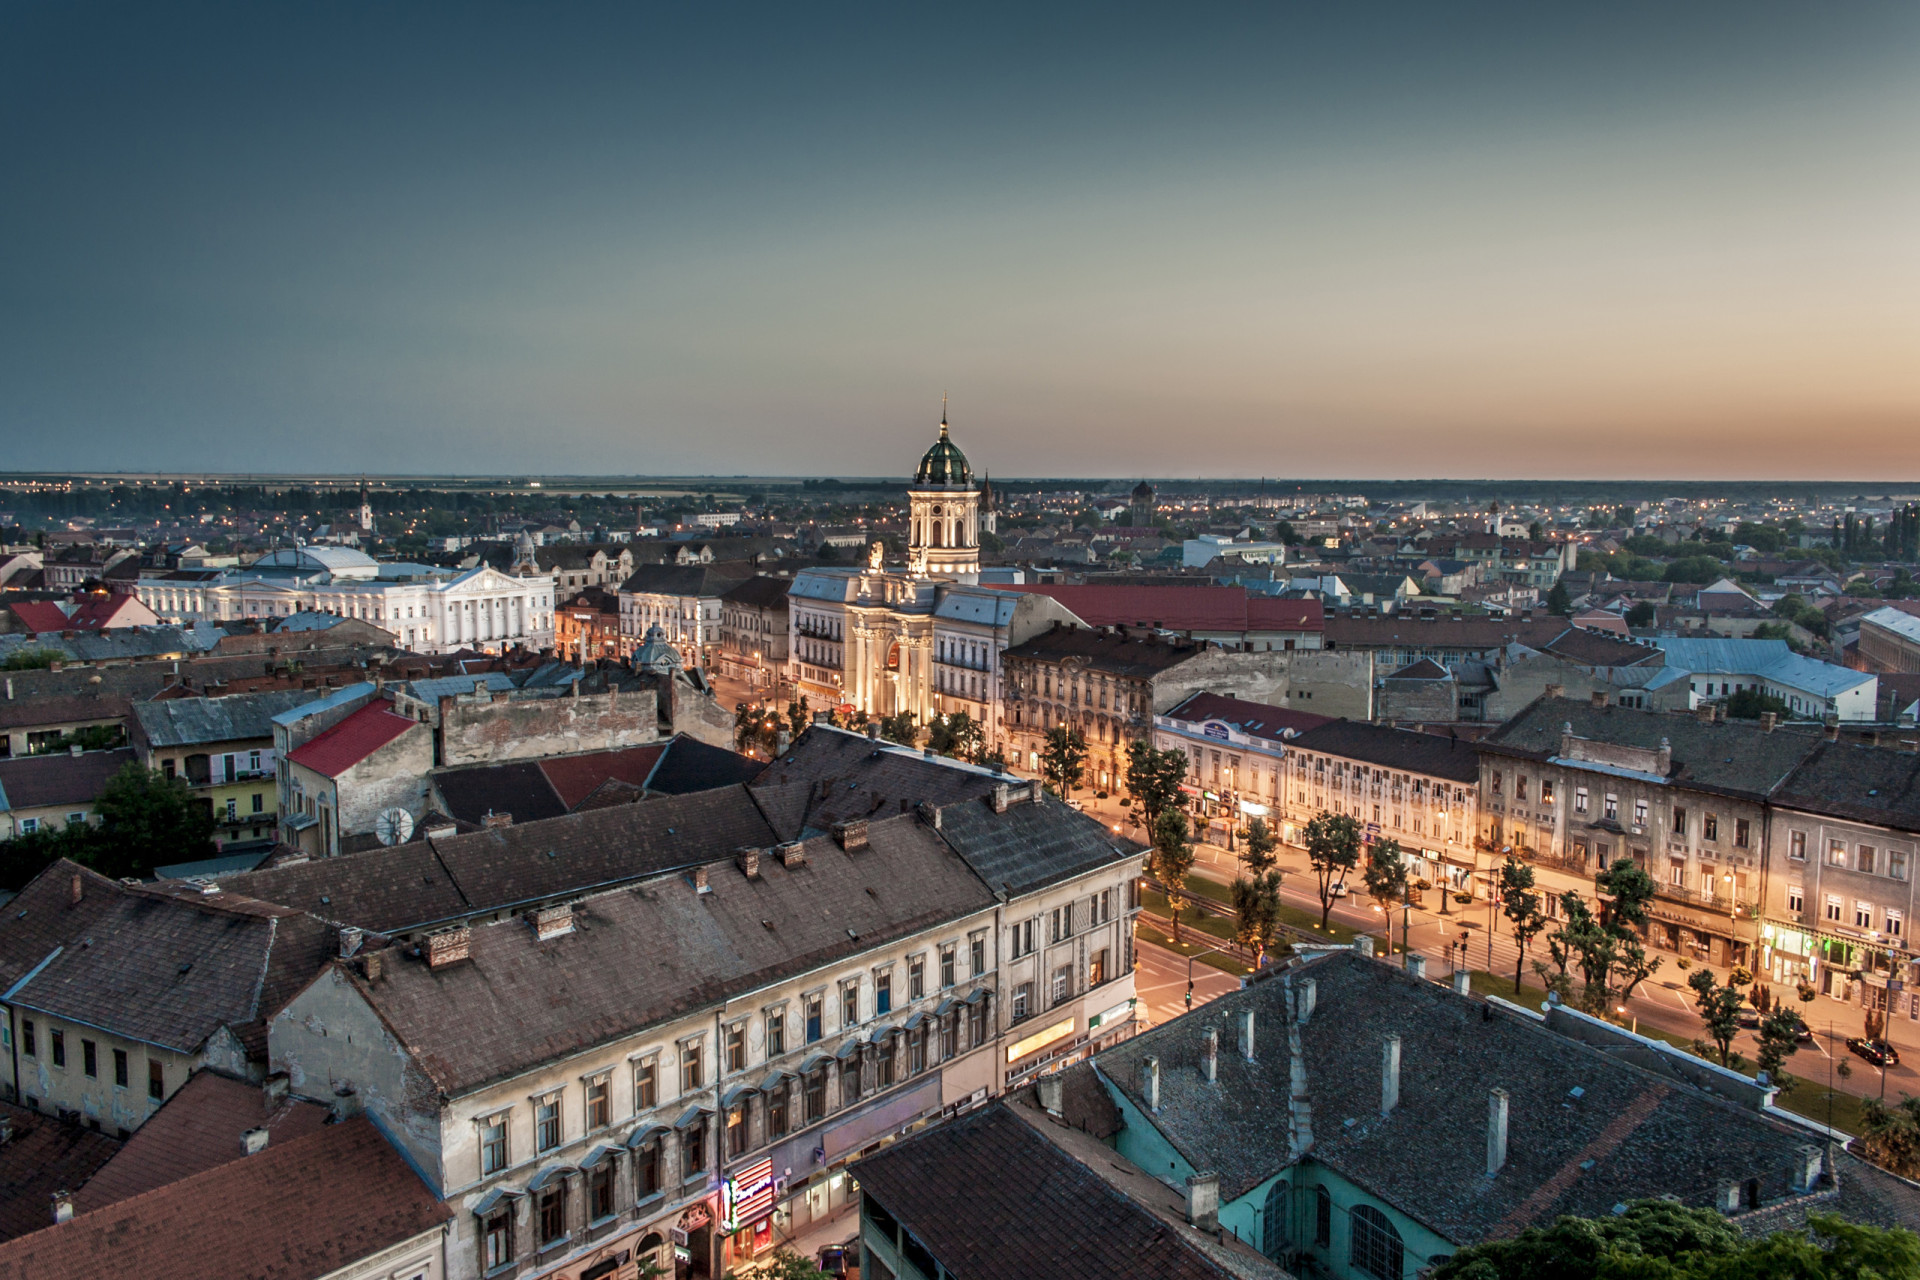 <p>From Belgrade, you would fly about 106 mi (170 km) in 30 minutes and land in Arad in western Romania. The city has an impressive display of architecture, but you will have to miss it as you make your way to the next and final destination on this list.</p><p><a href="https://www.msn.com/en-us/community/channel/vid-7xx8mnucu55yw63we9va2gwr7uihbxwc68fxqp25x6tg4ftibpra?cvid=94631541bc0f4f89bfd59158d696ad7e">Follow us and access great exclusive content every day</a></p>